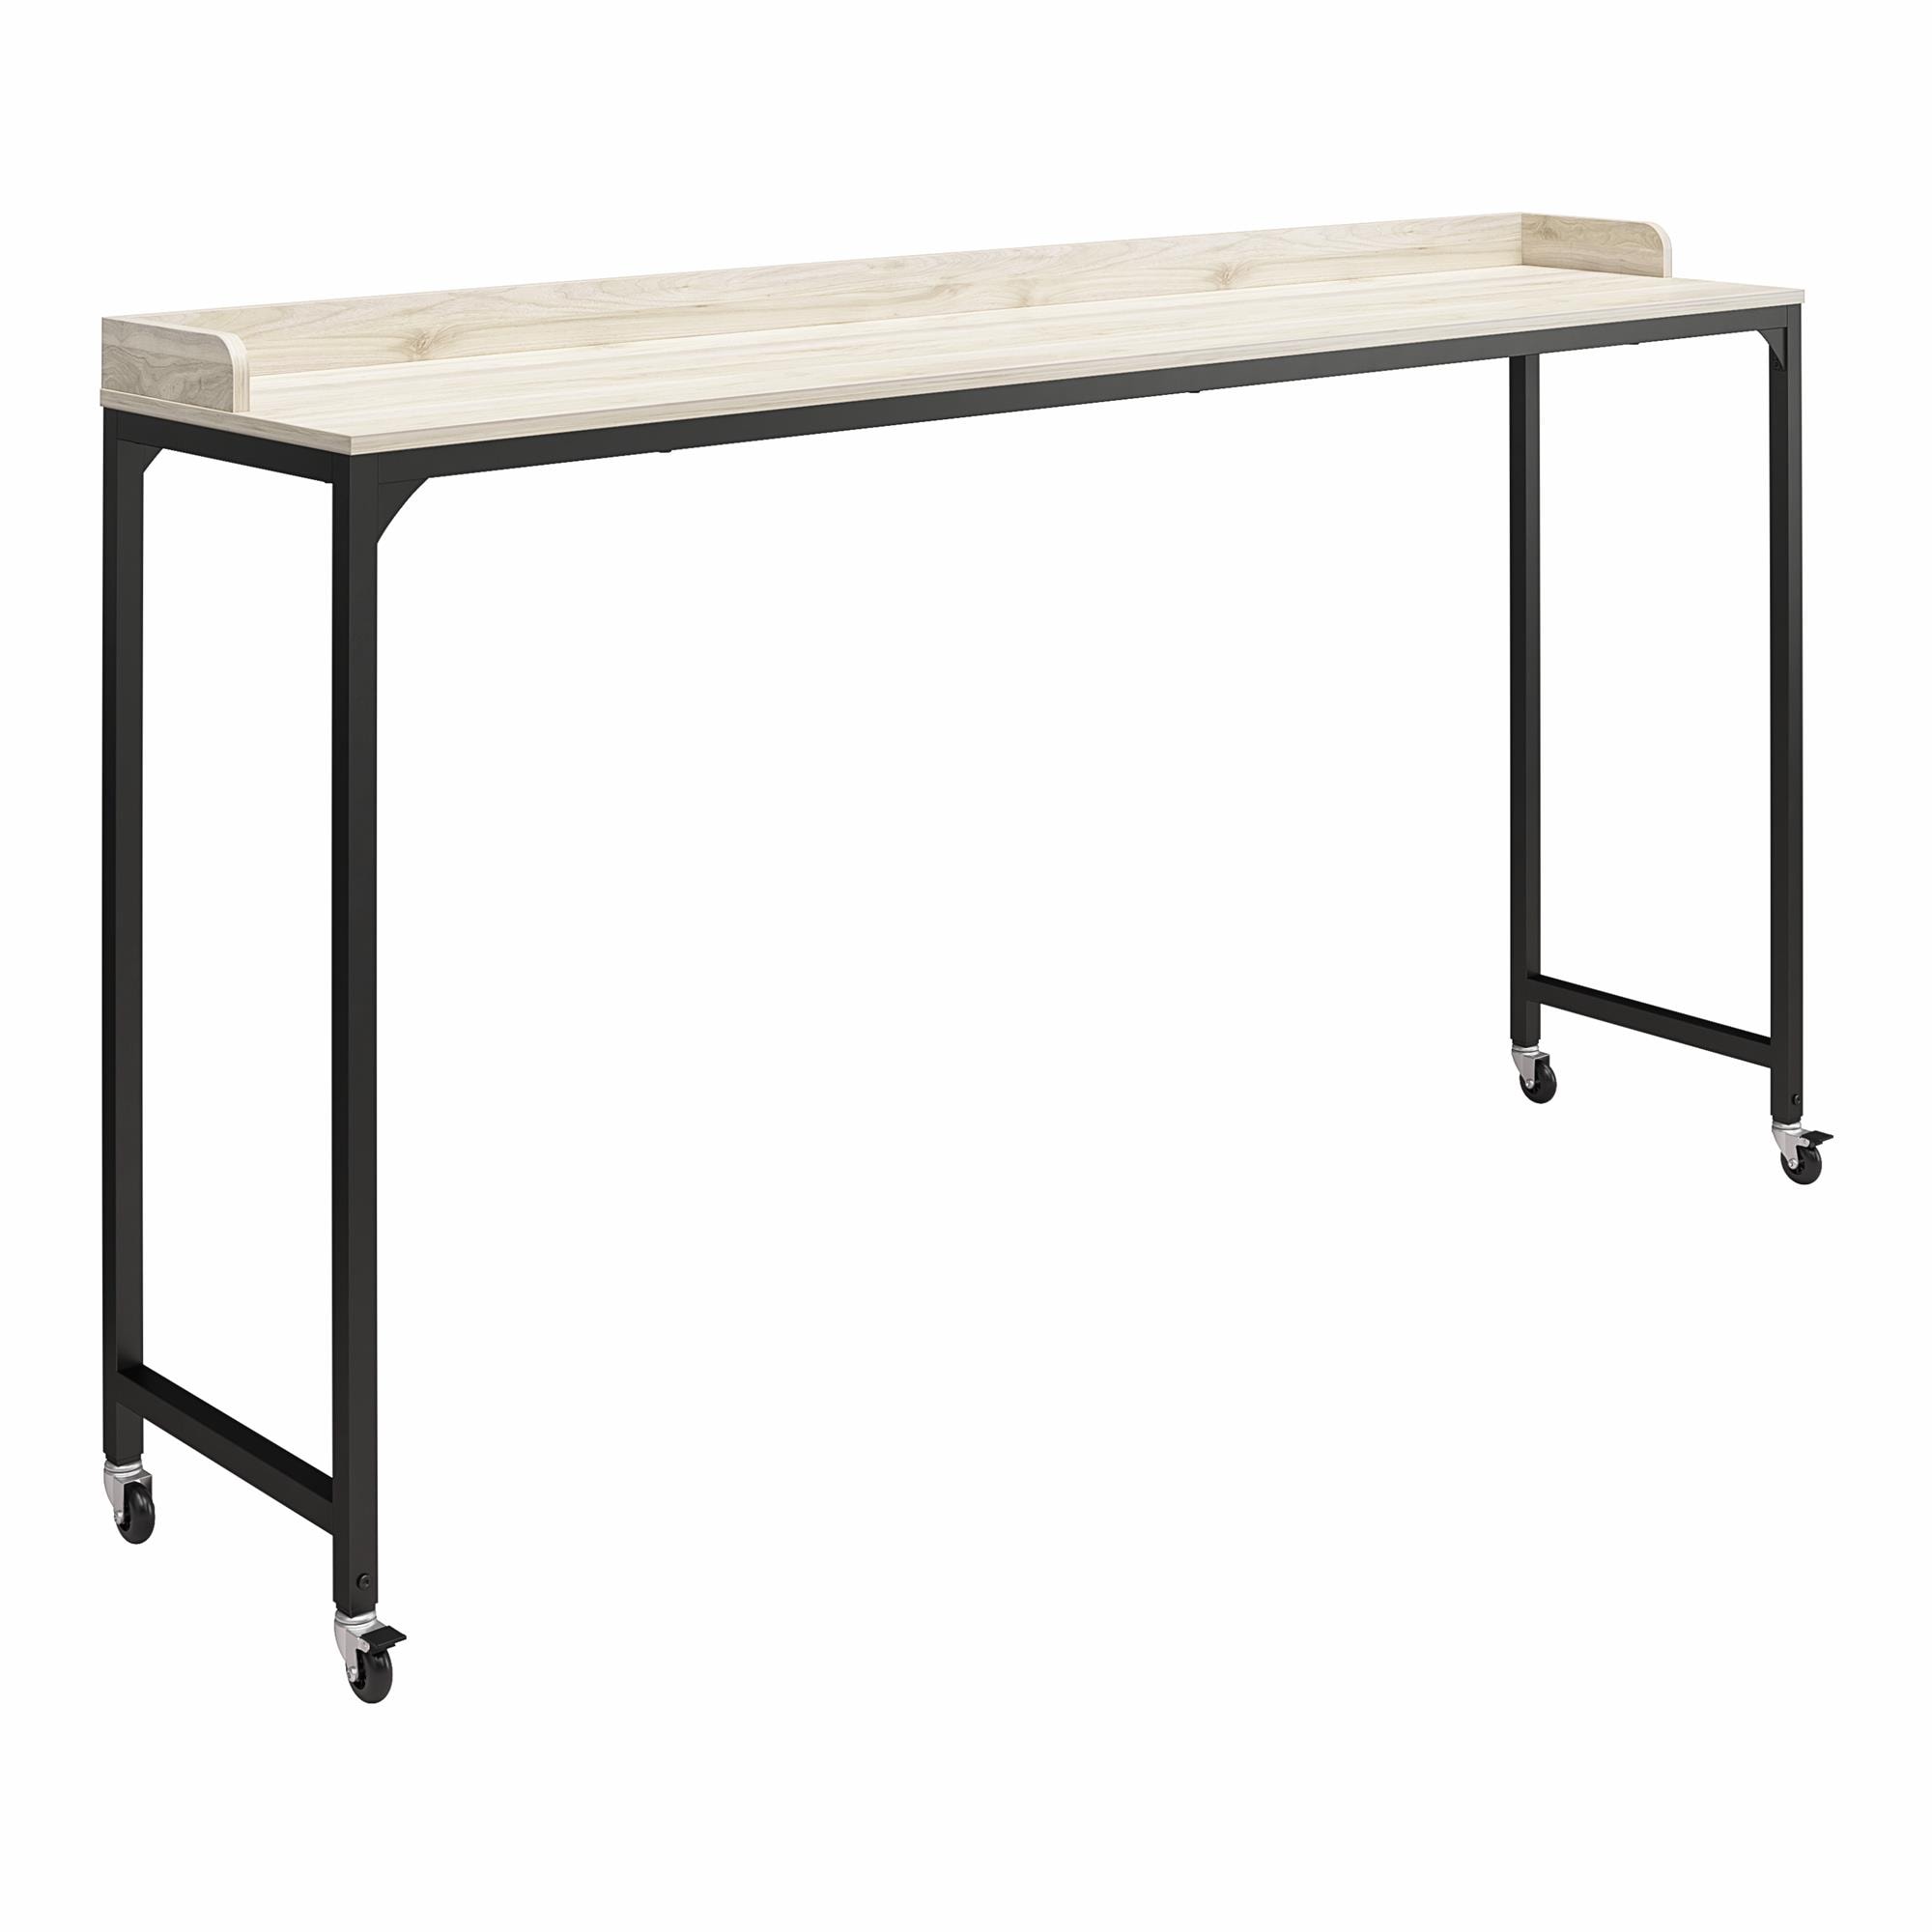 Ameriwood Home Park Hill Adjustable Height Over-The-Bed Desk with